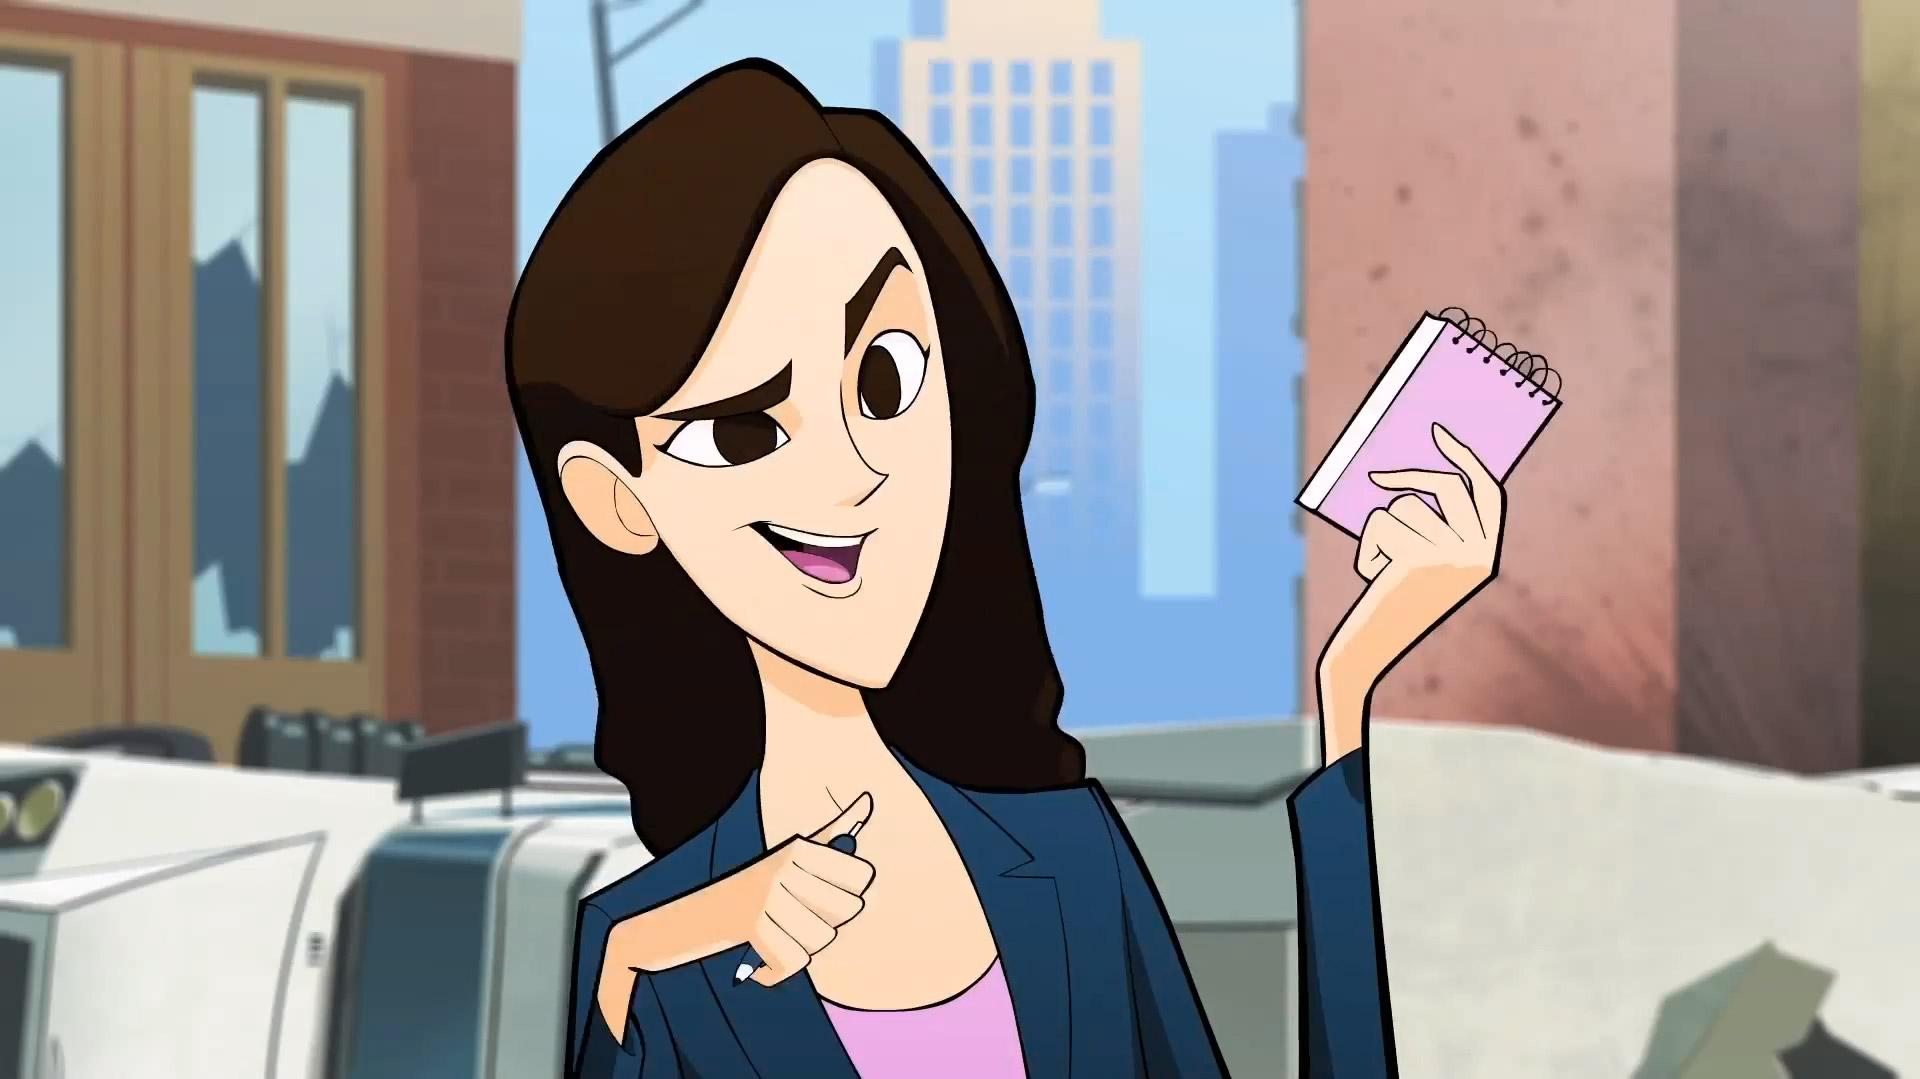 lois-lane-tries-to-interview-batman-in-animated-short-2.jpg